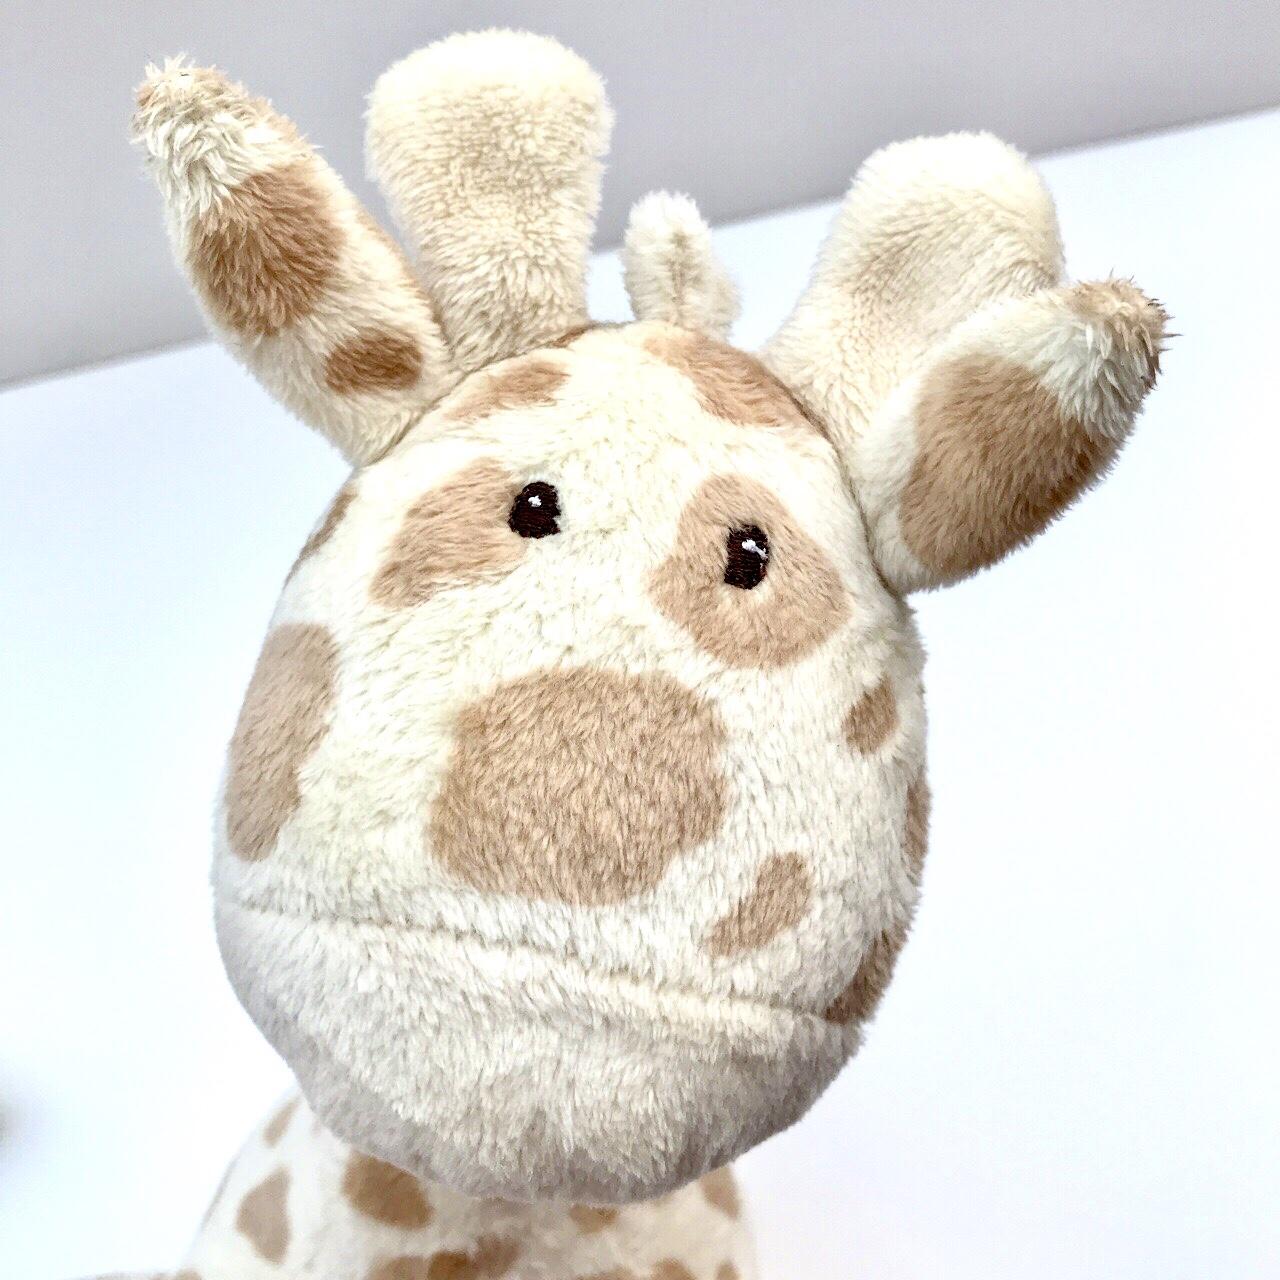 Giraffe Soft Toy, M&S Collection